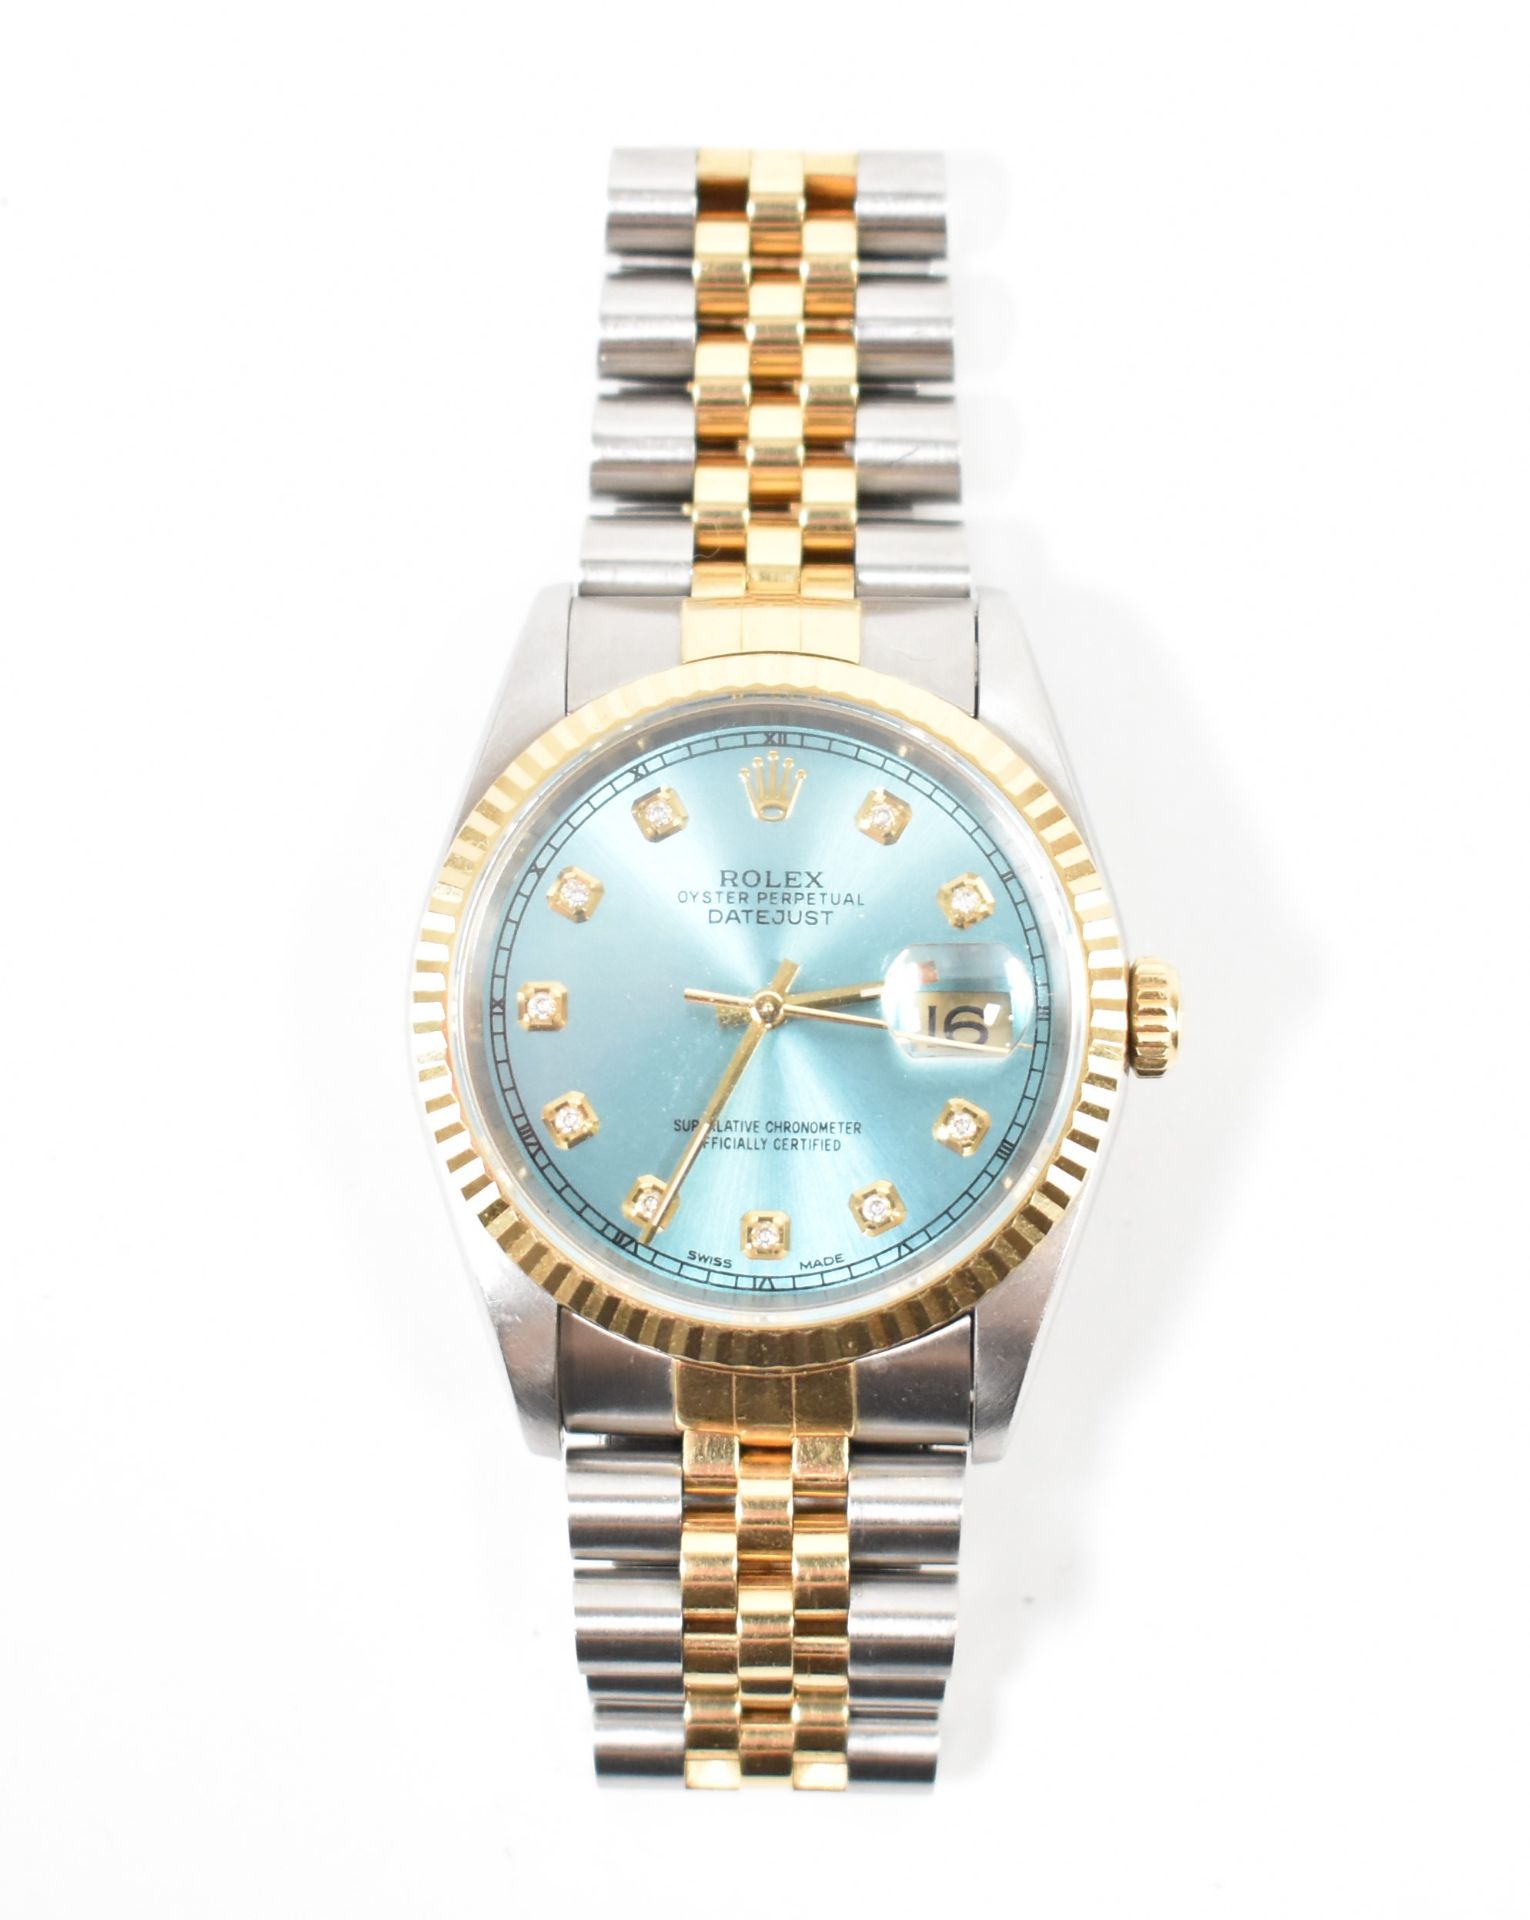 ROLEX OYSTER PERPETUAL SUPERLATIVE CHRONOMETER WRIST WATCH - Image 2 of 6